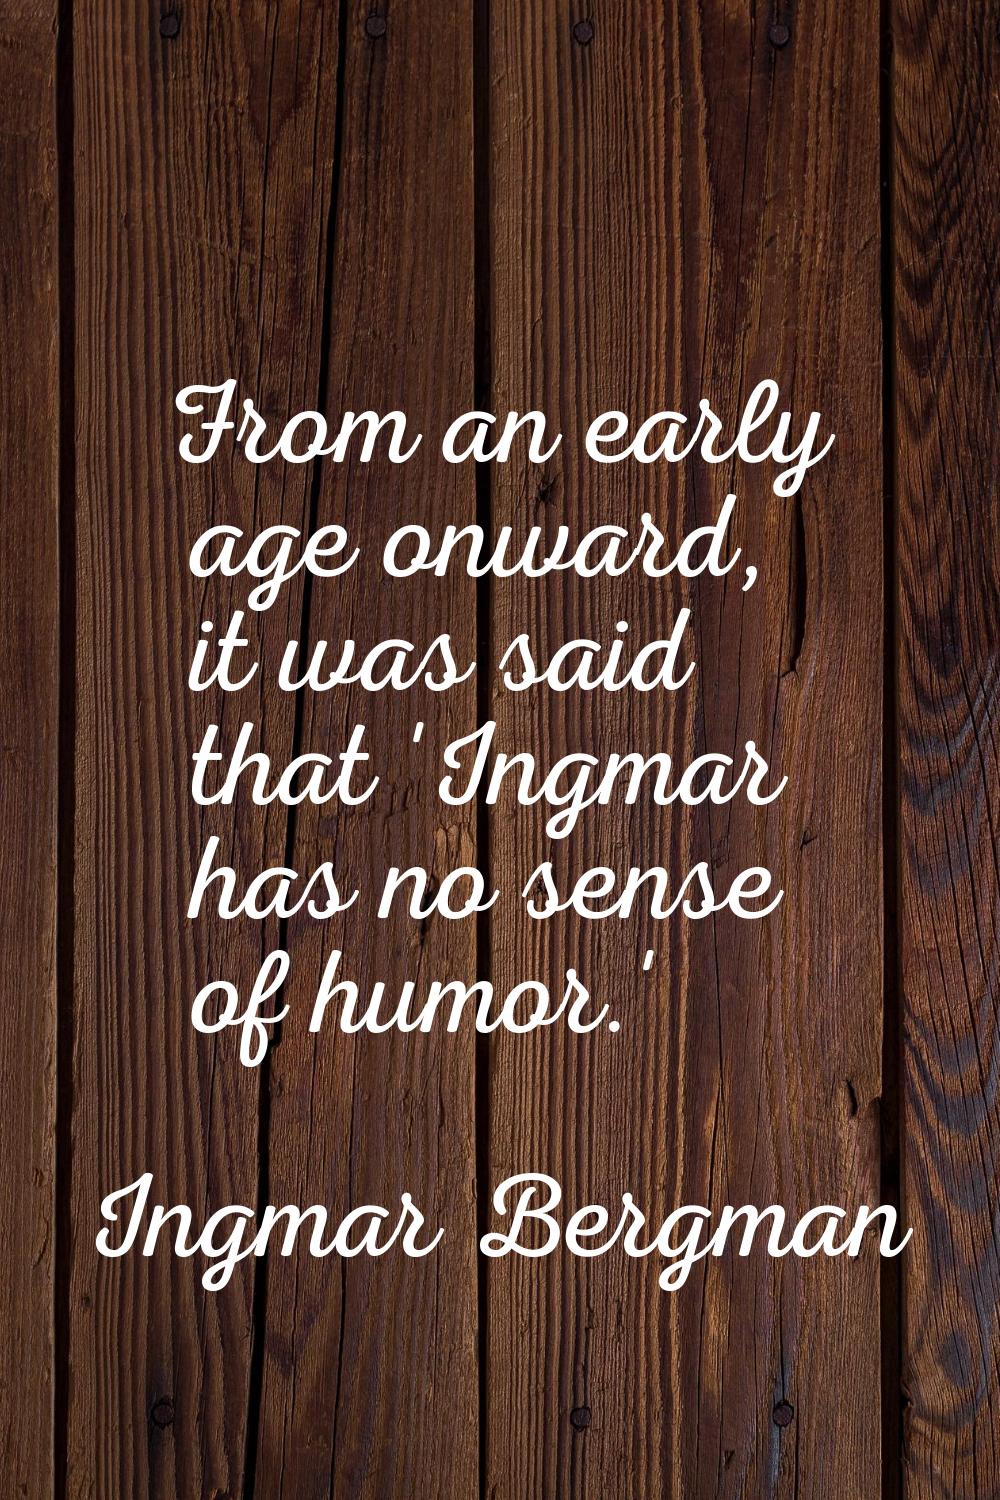 From an early age onward, it was said that 'Ingmar has no sense of humor.'